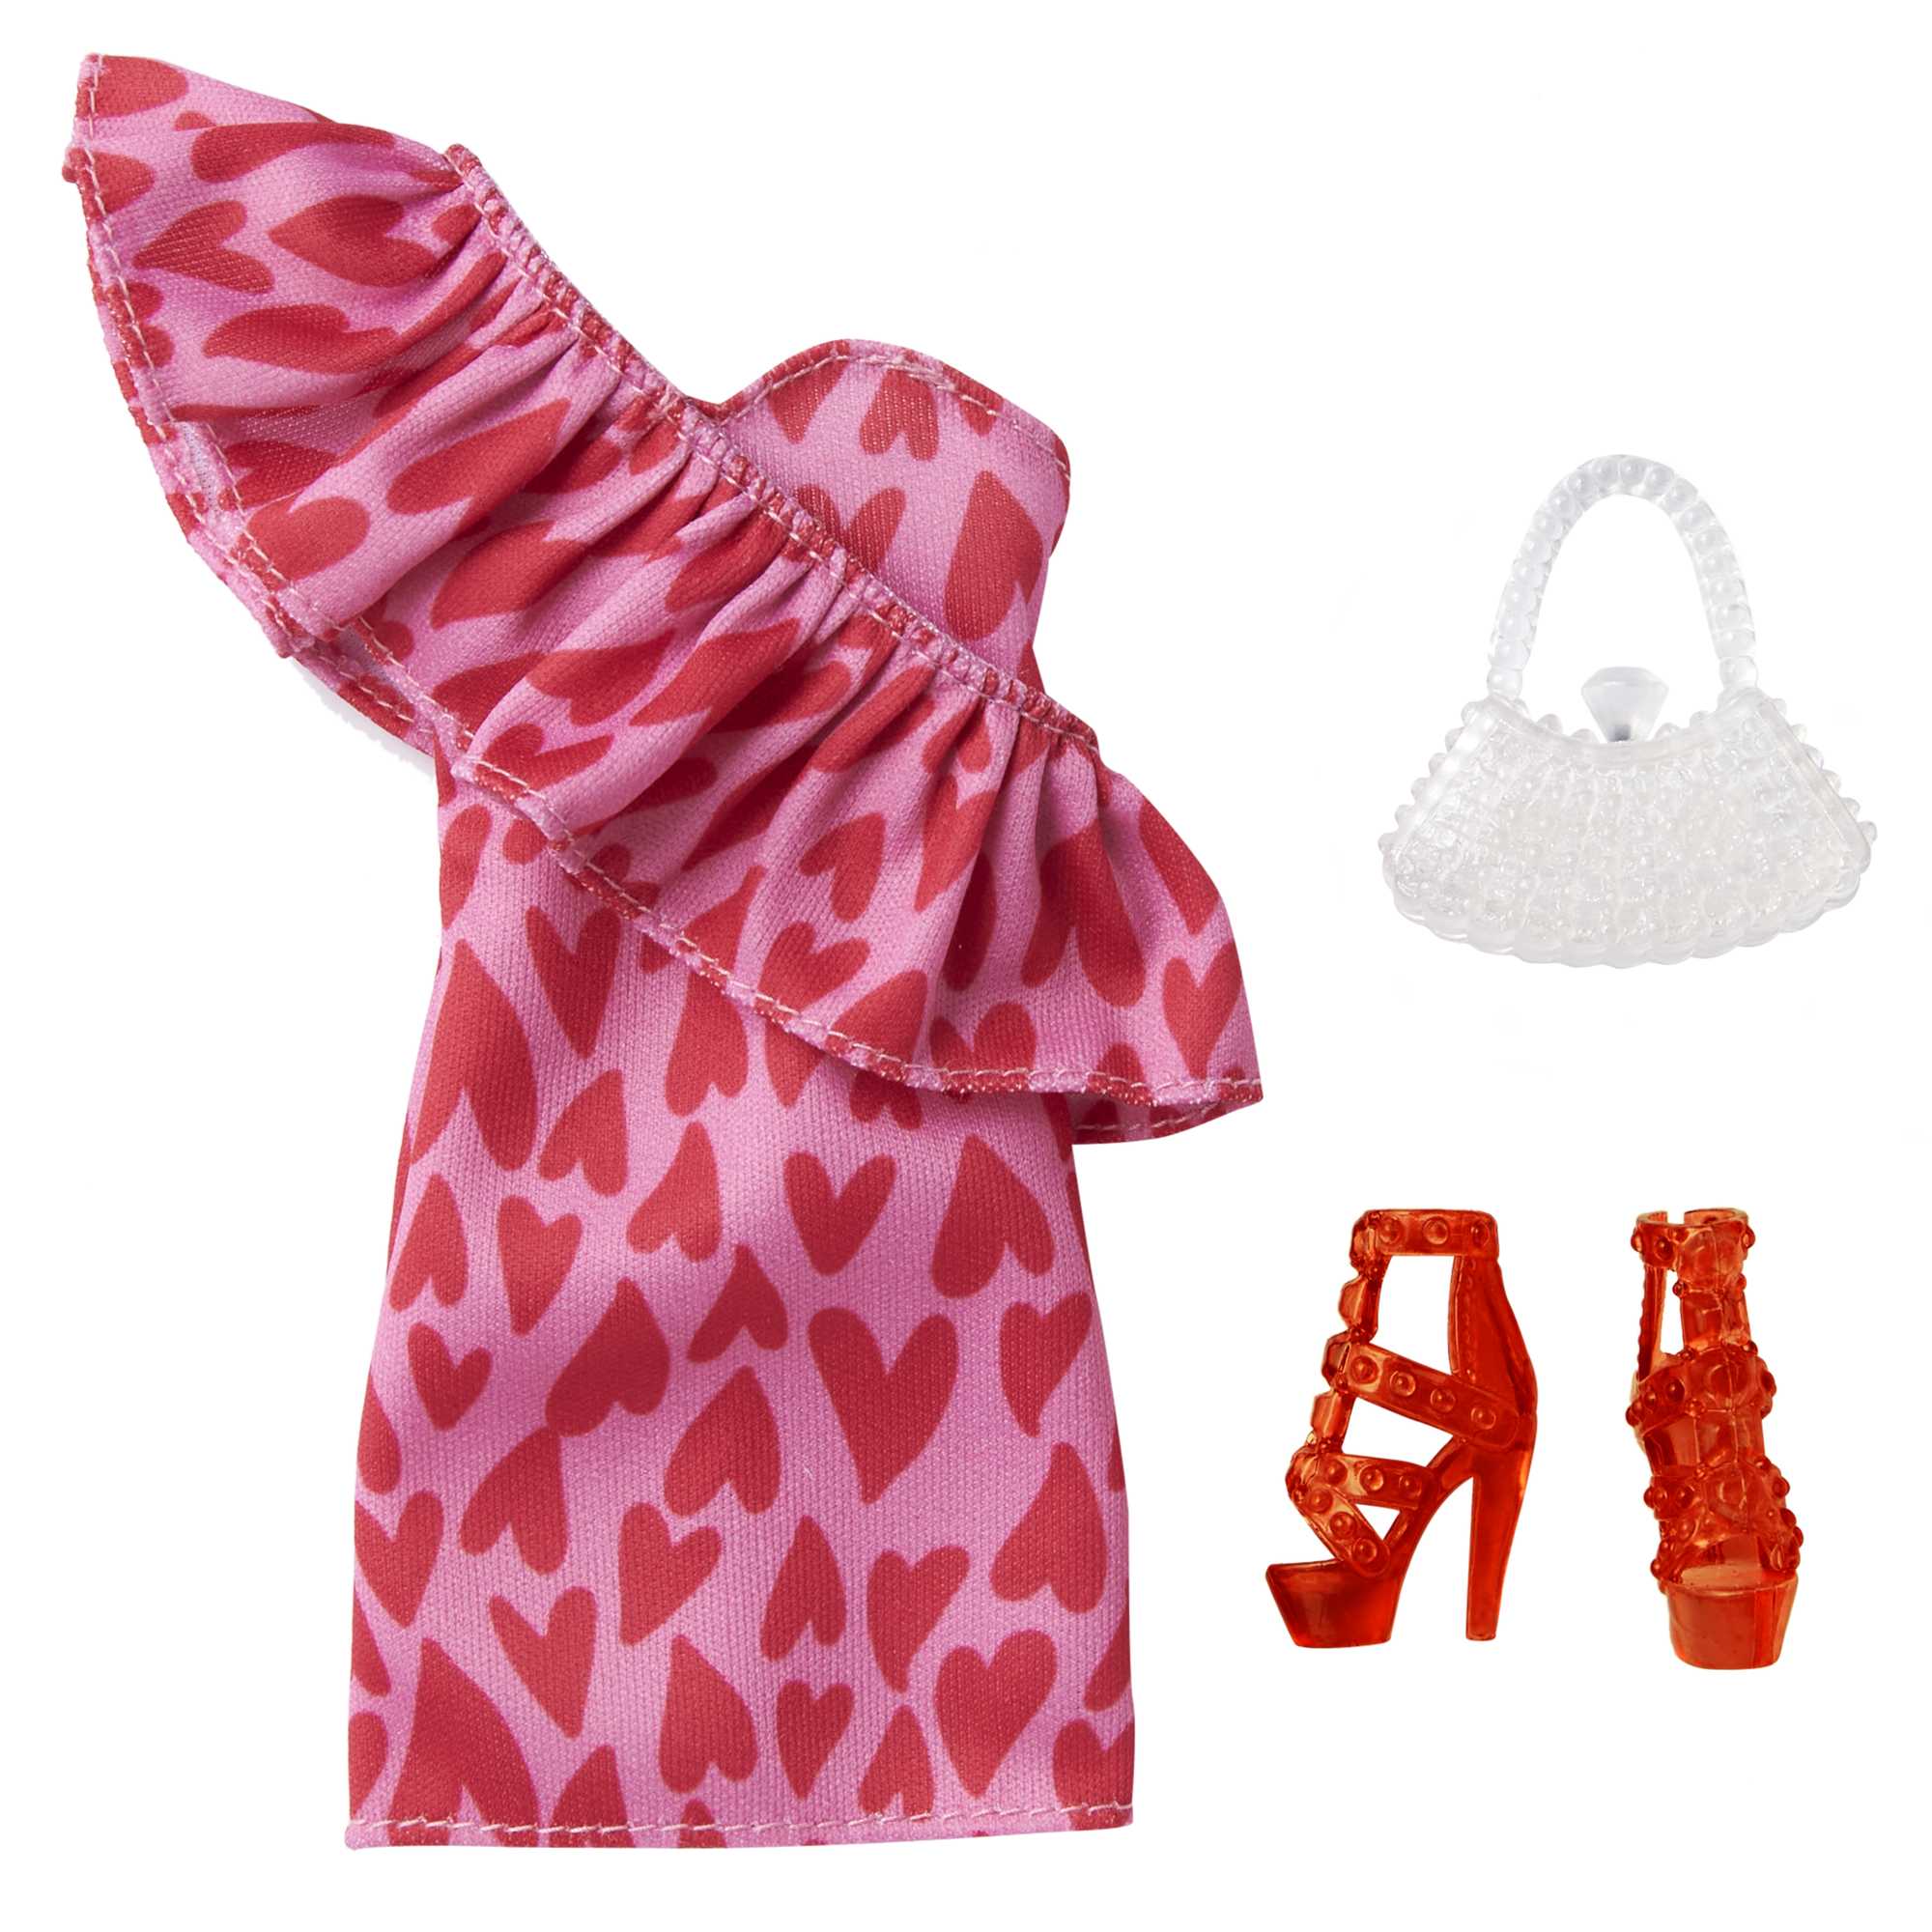 Barbie Clothes, Deluxe Beach Bag & Accessories